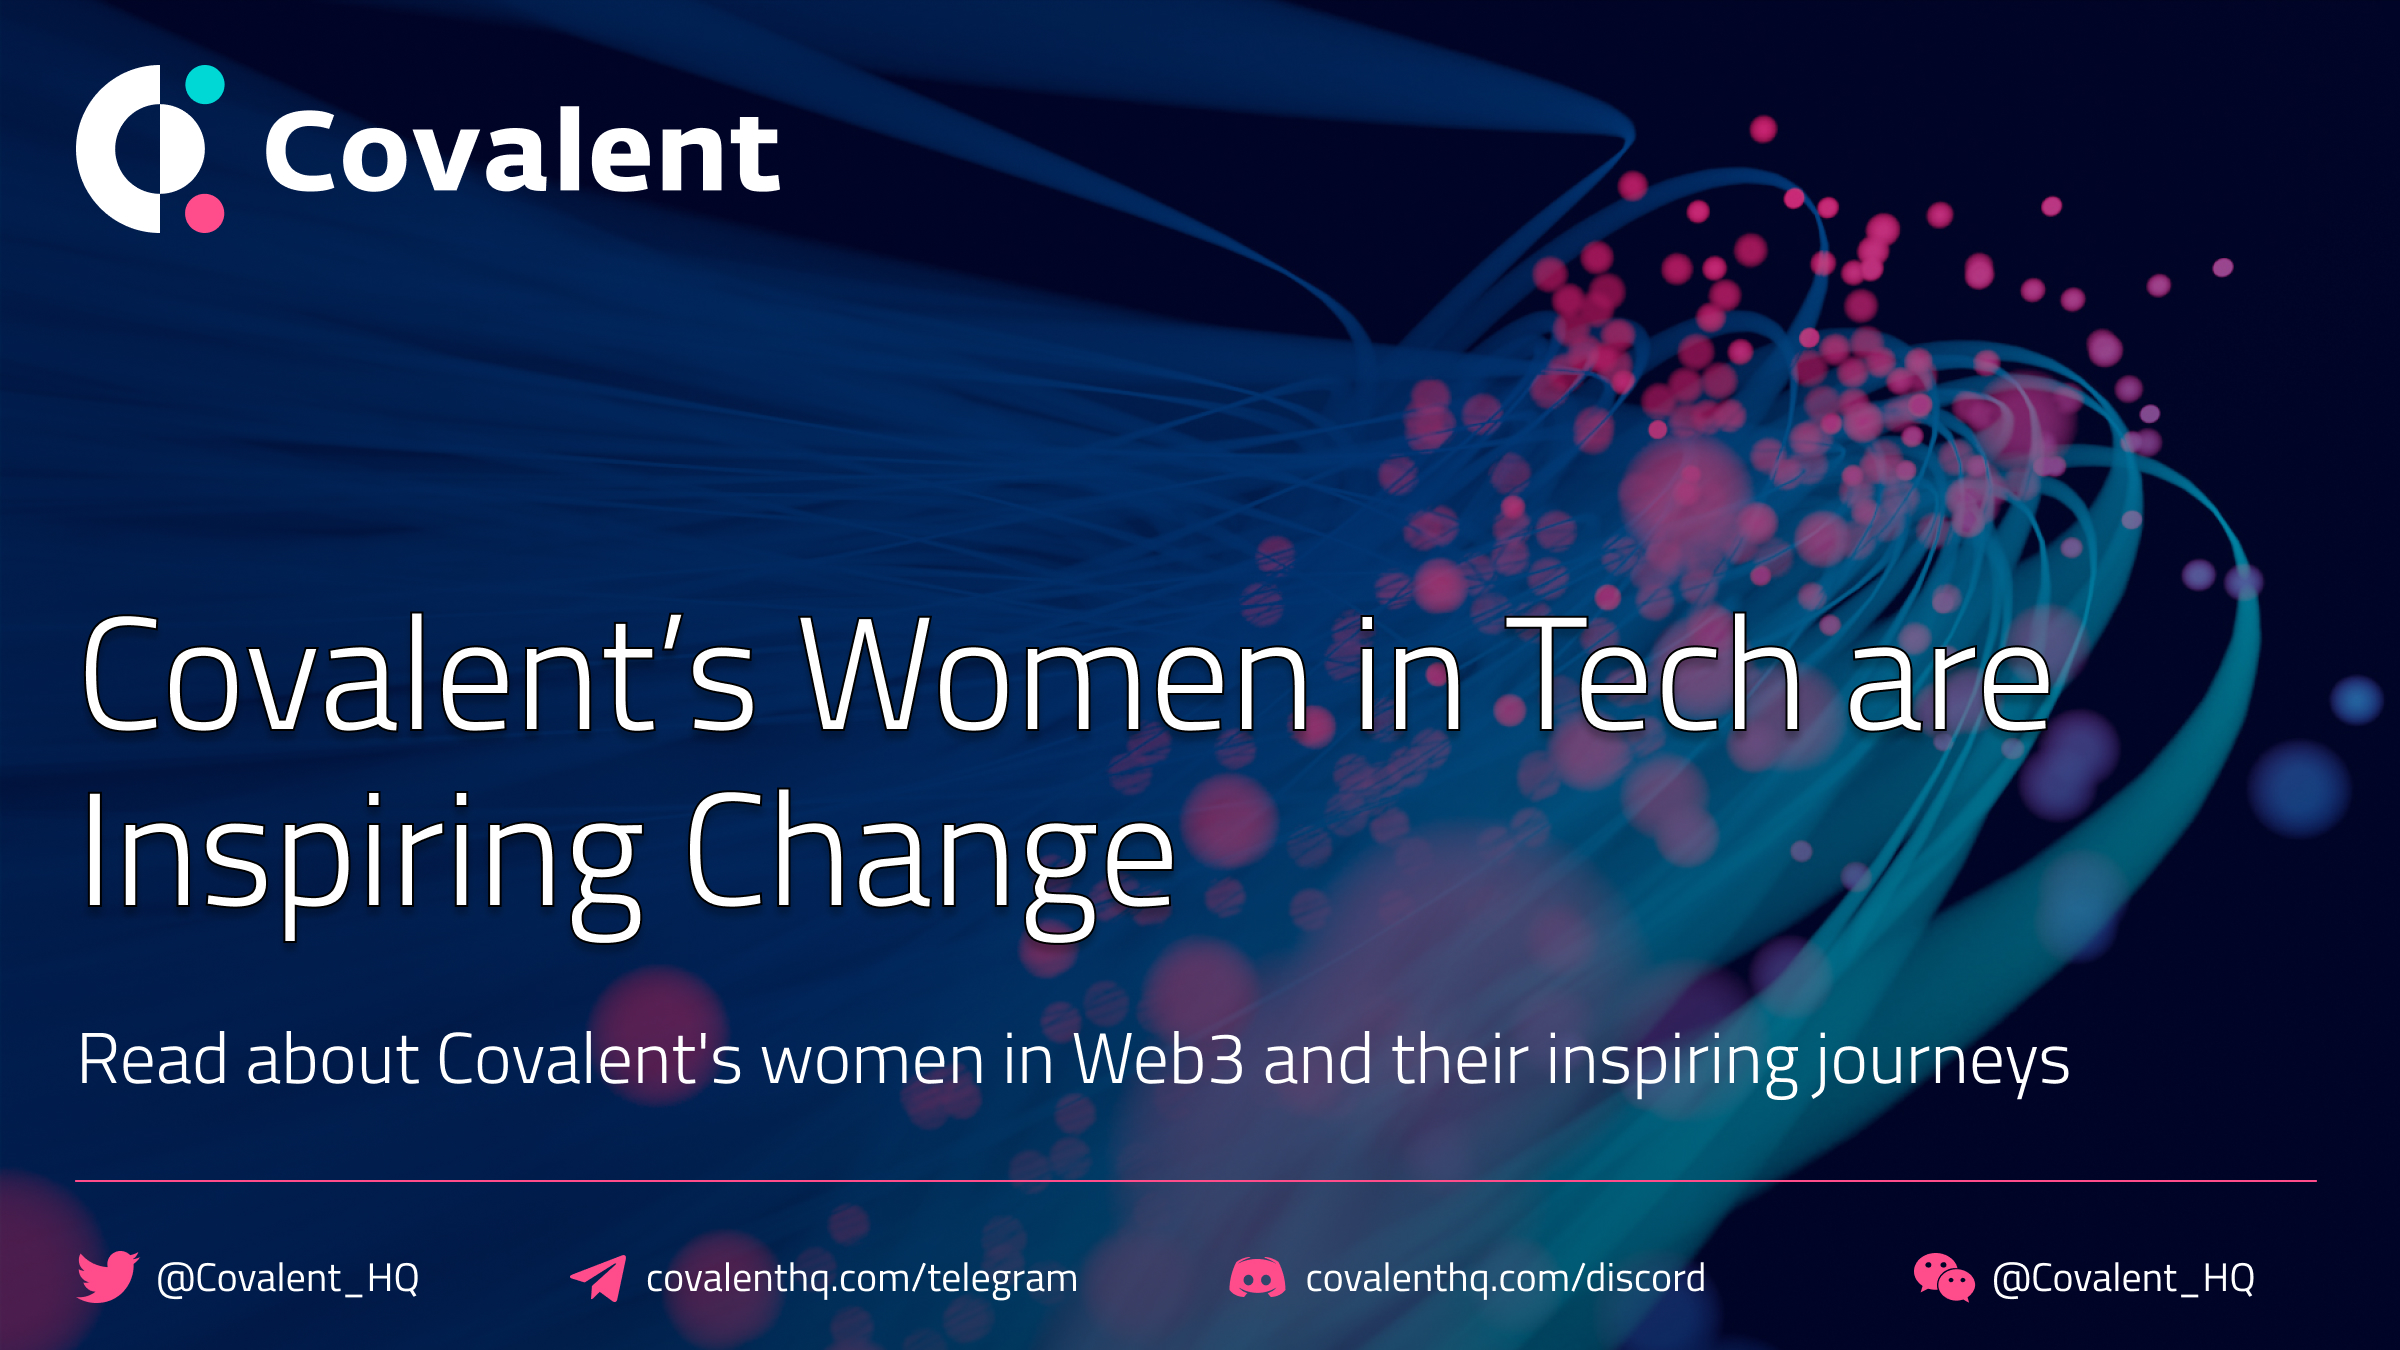 Covalent’s Women-in-Tech Are Inspiring Change